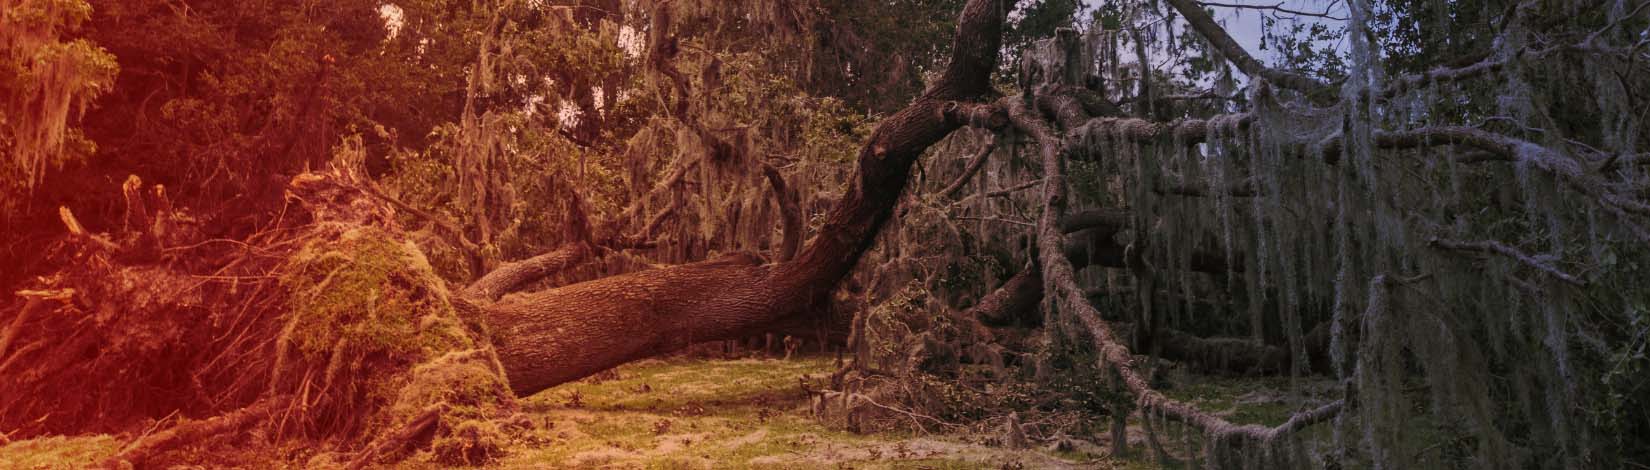 a large tree is uprooted following high winds from a storm